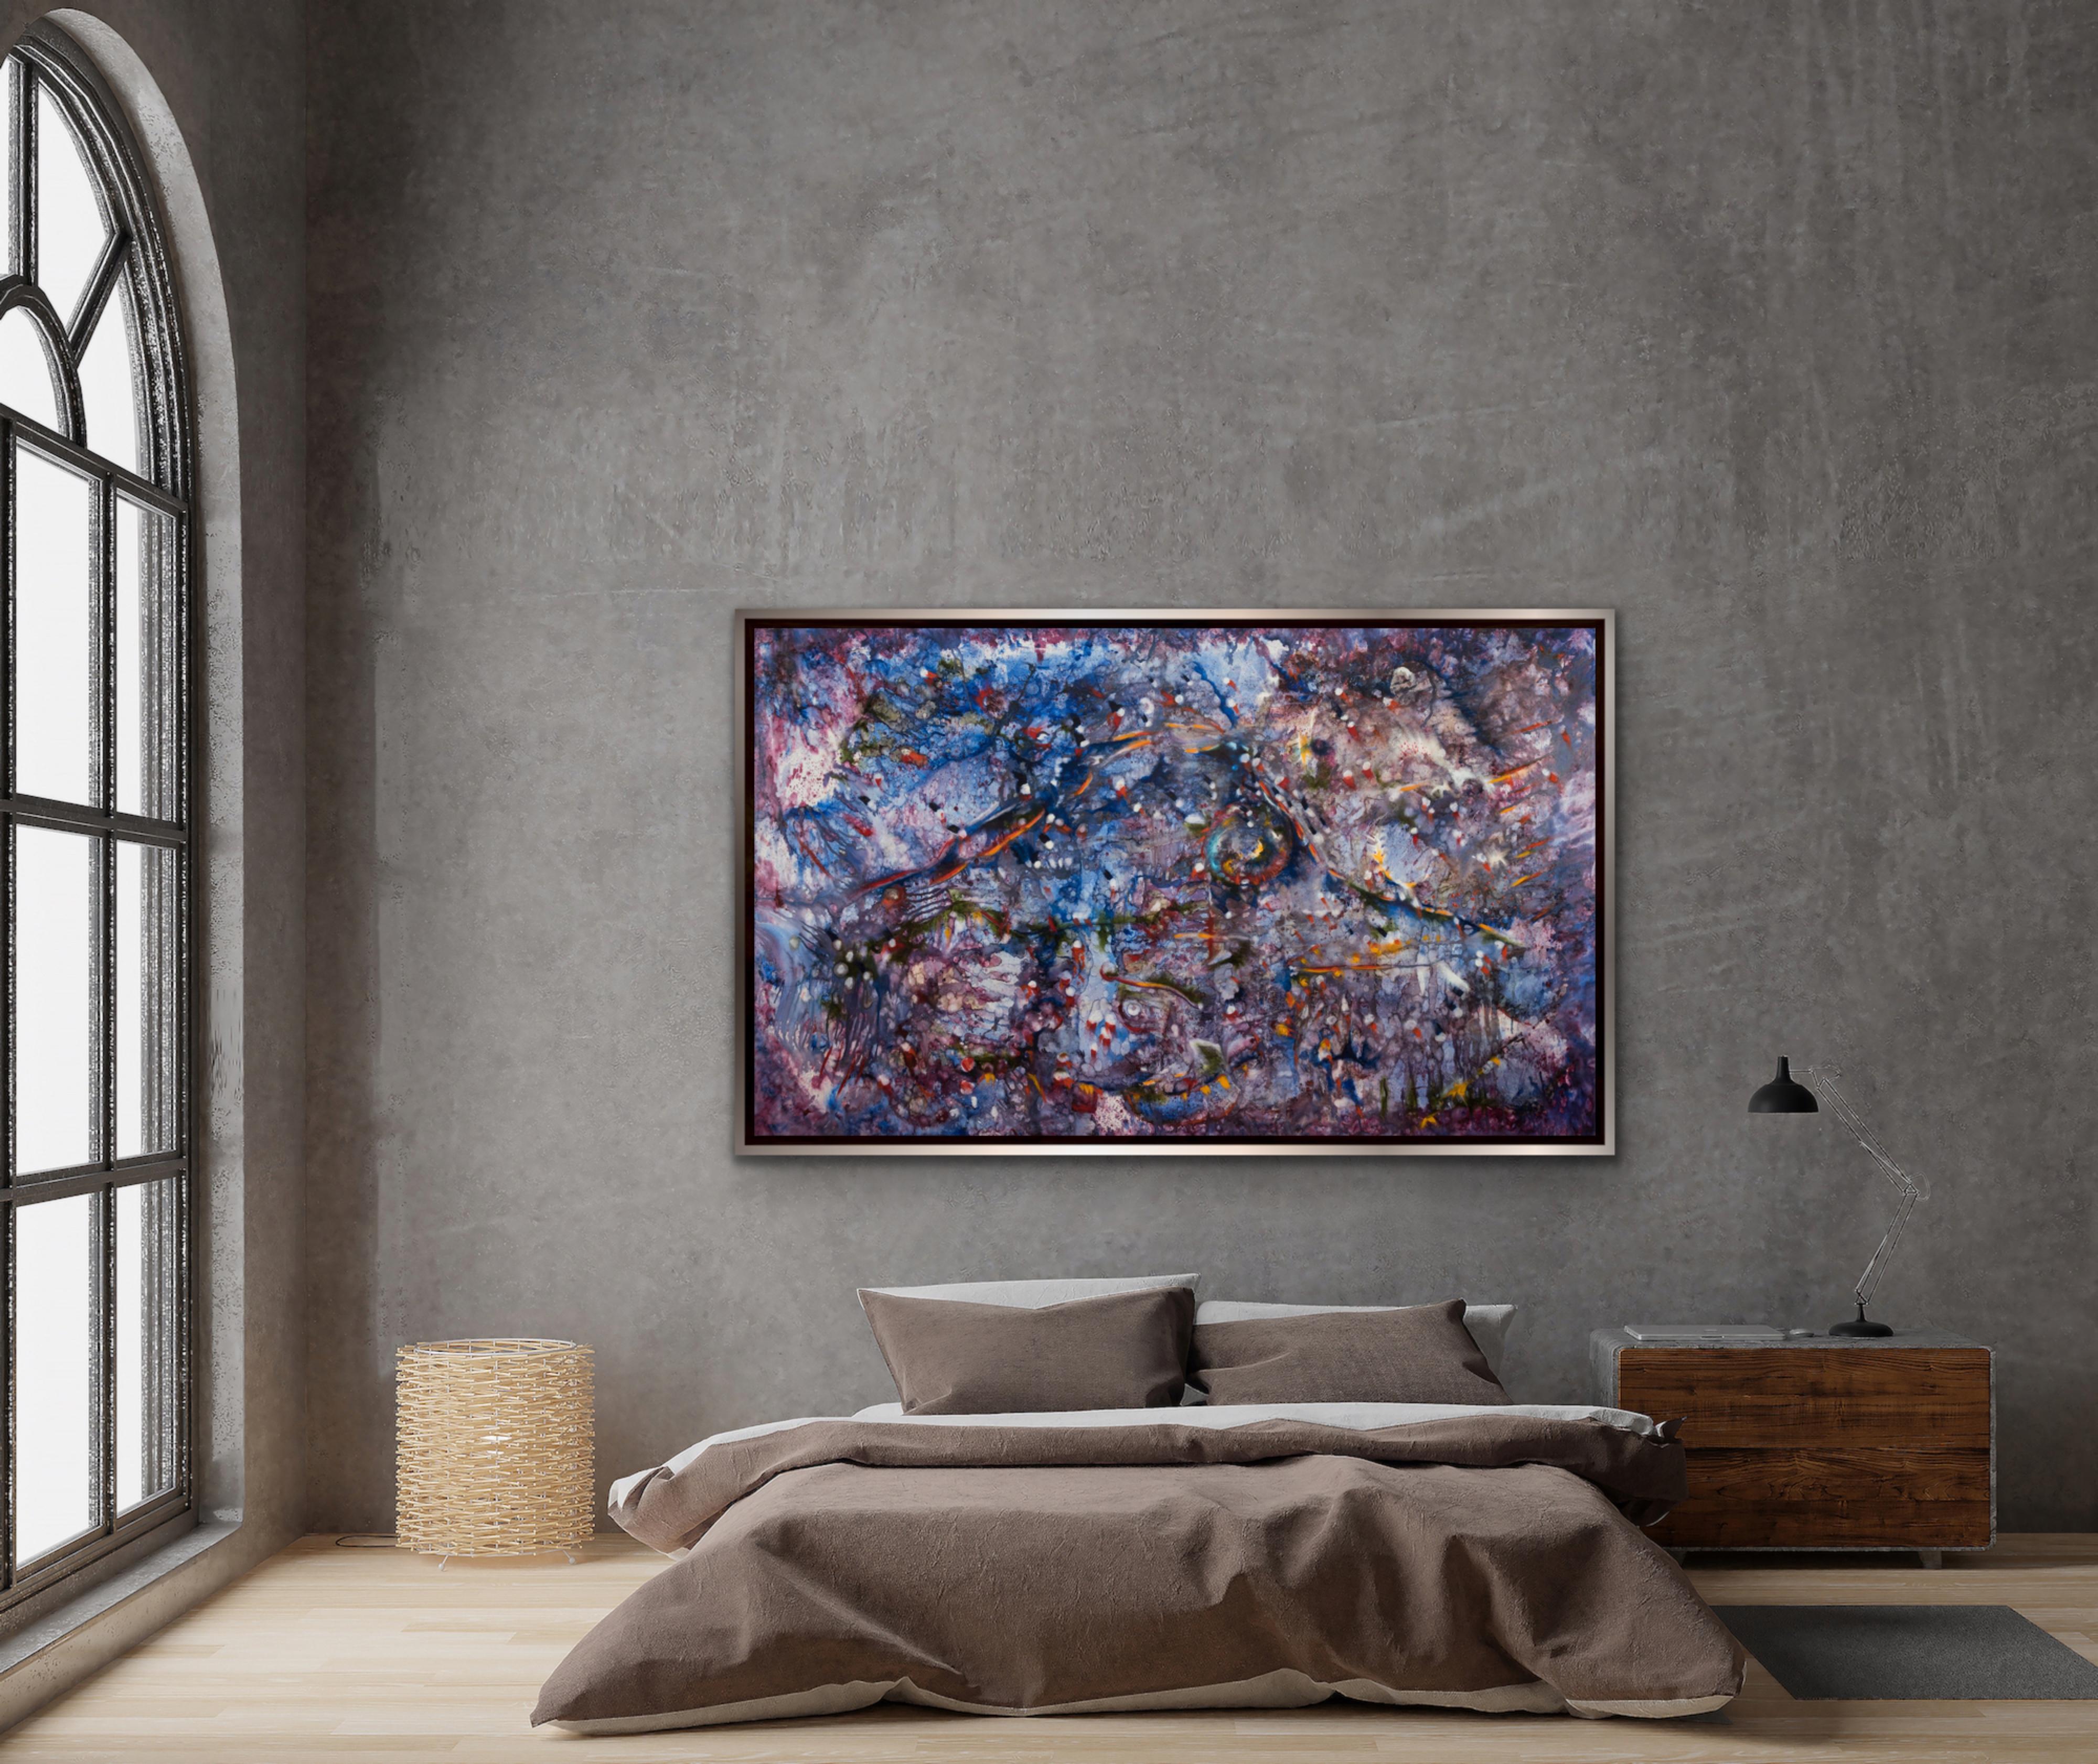 MARINE COSMOS Large Blue Violet Red colorful abstract surrealist Armenian Artist For Sale 5